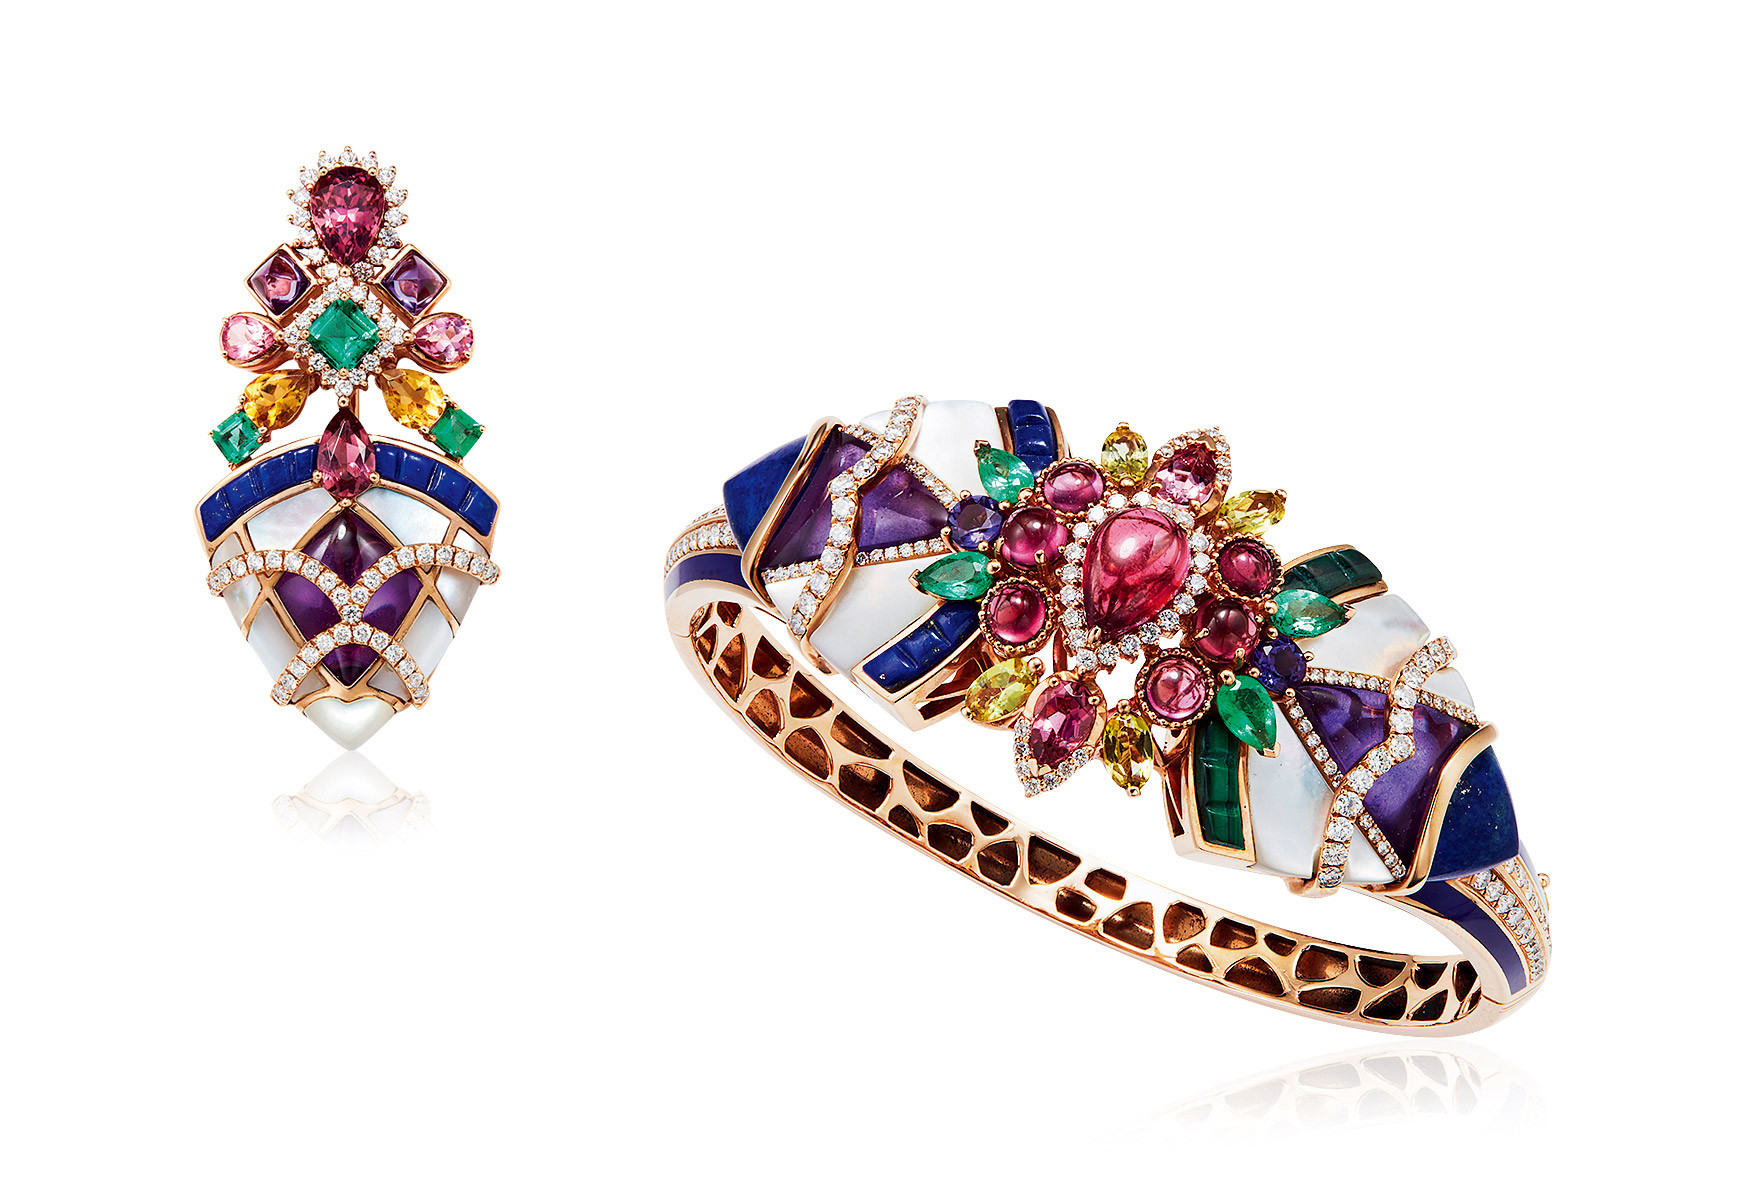 A SET OF TOURMALINE, DIAMOND AND COLORED STONE BANGLE AND BROOCH, DESIGNED BY WEI WENJaUN